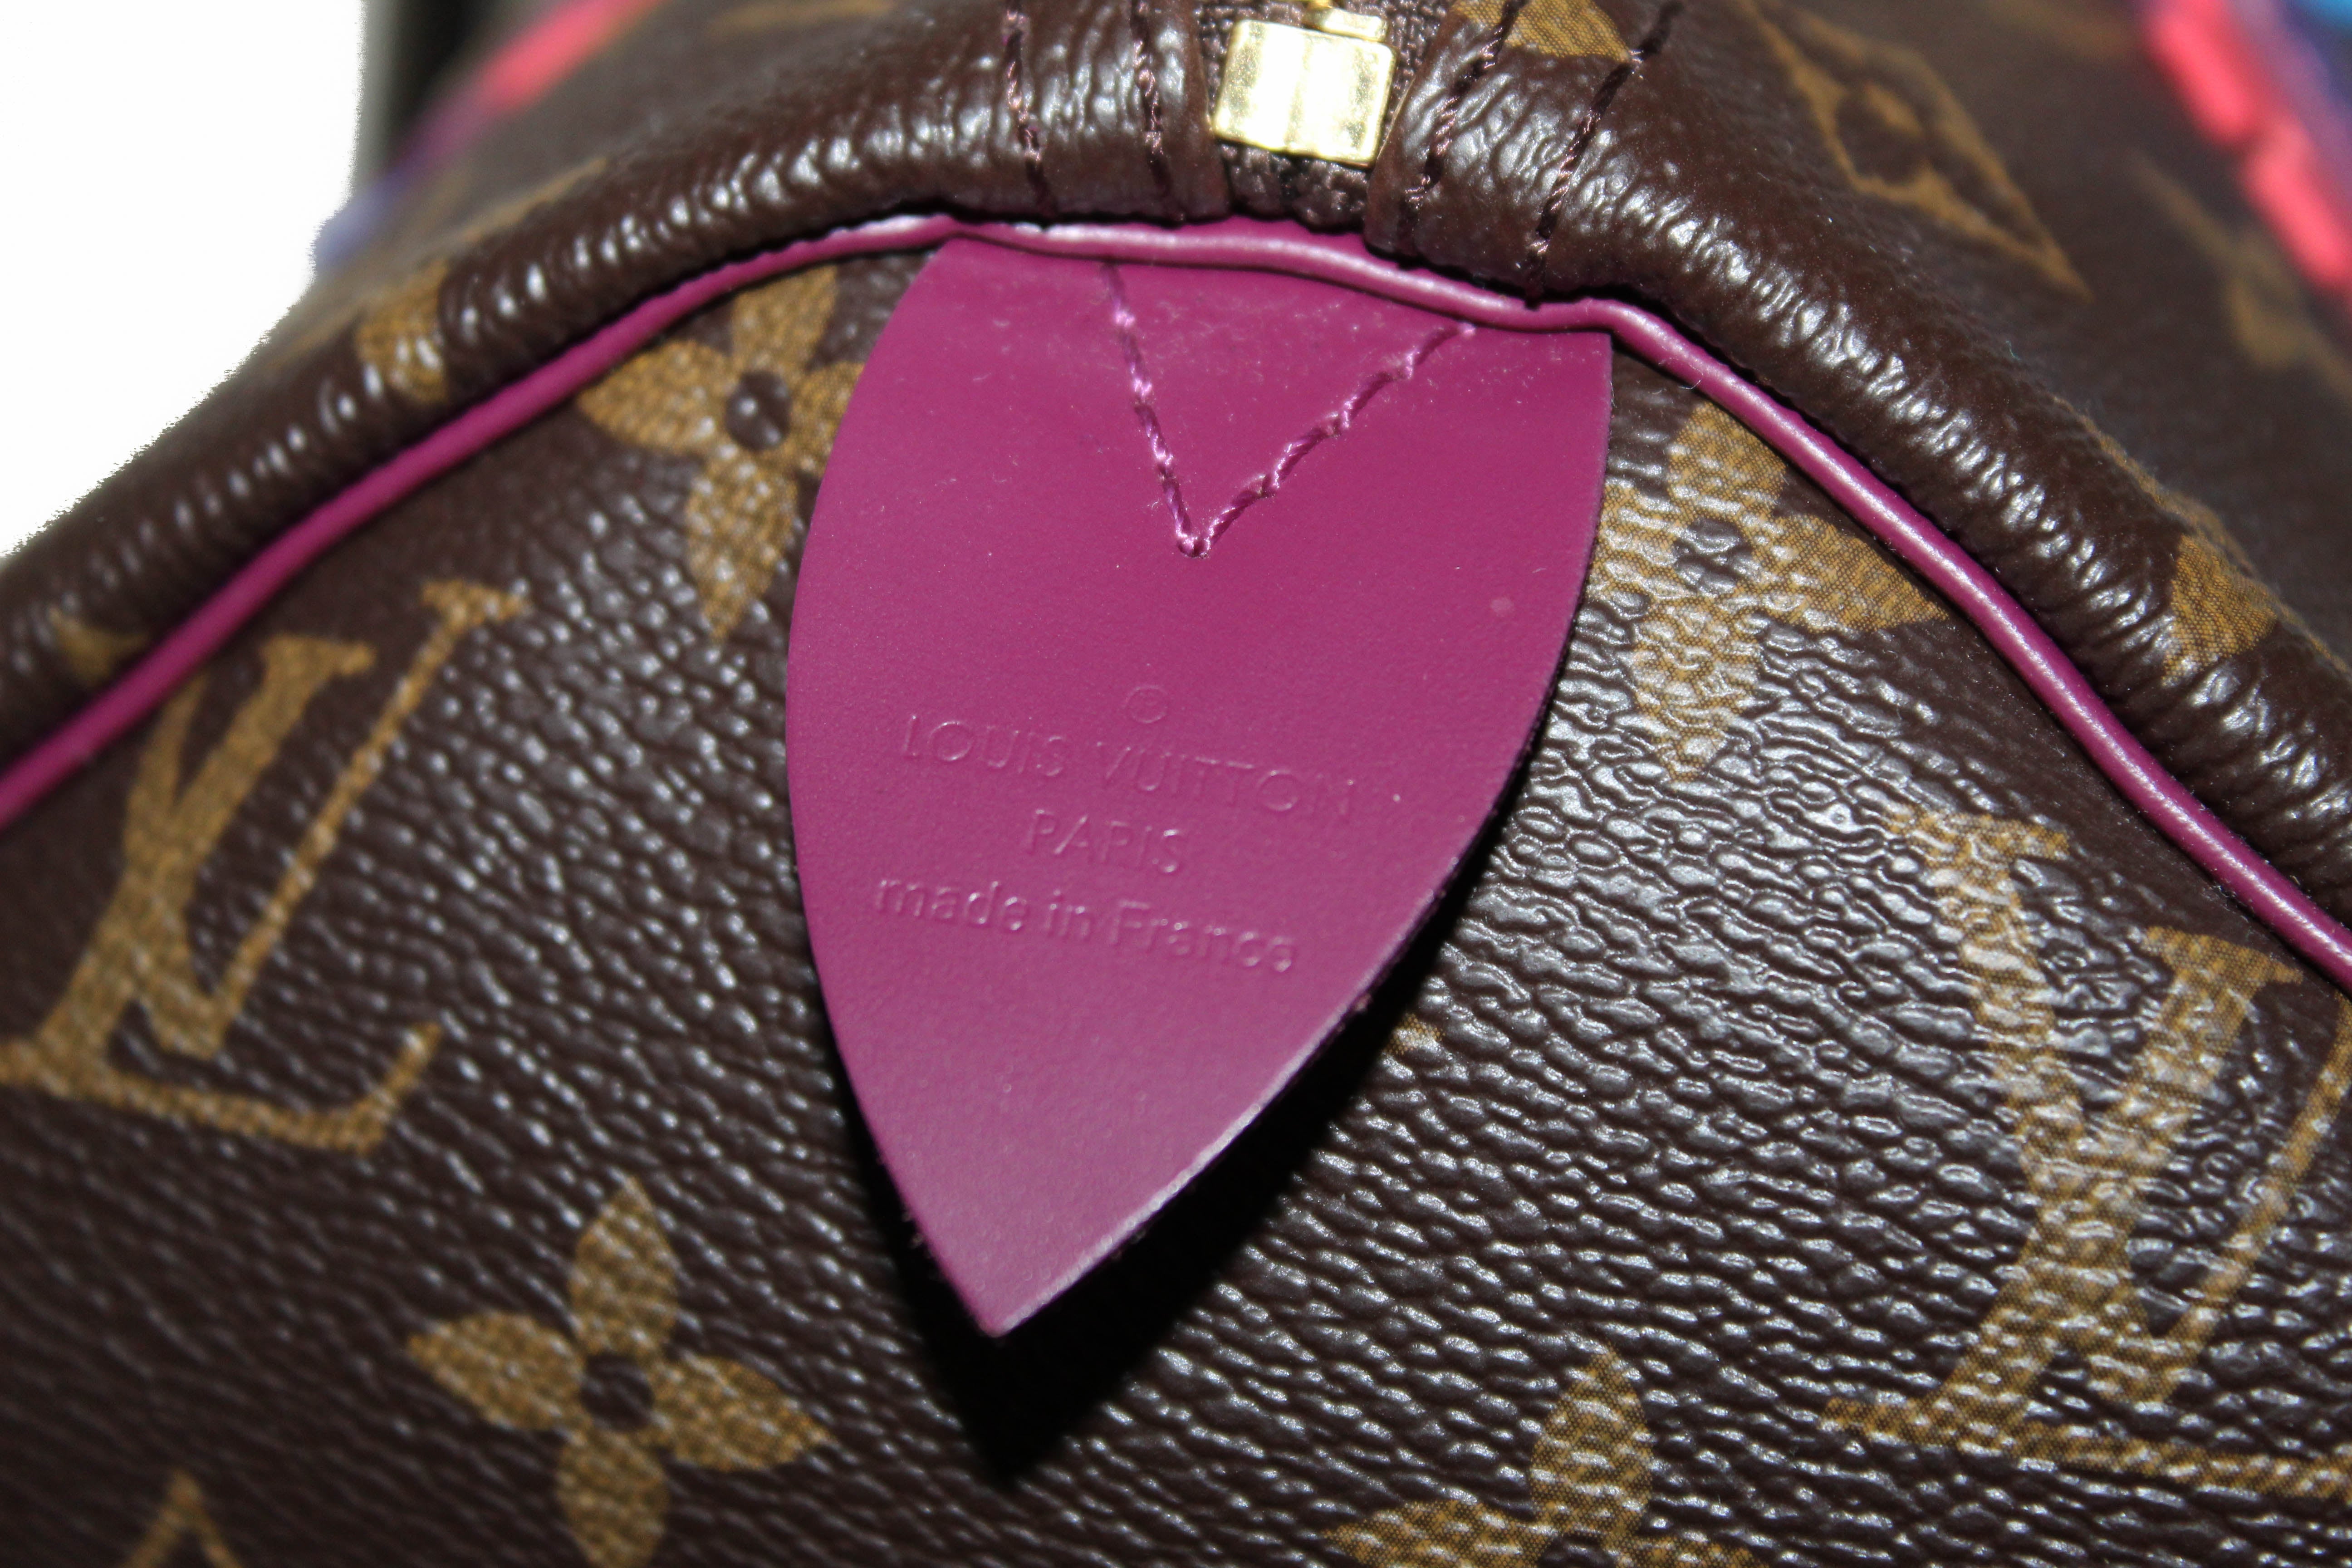 LOUIS VUITTON Speedy 30 limited edition bag in brown totem